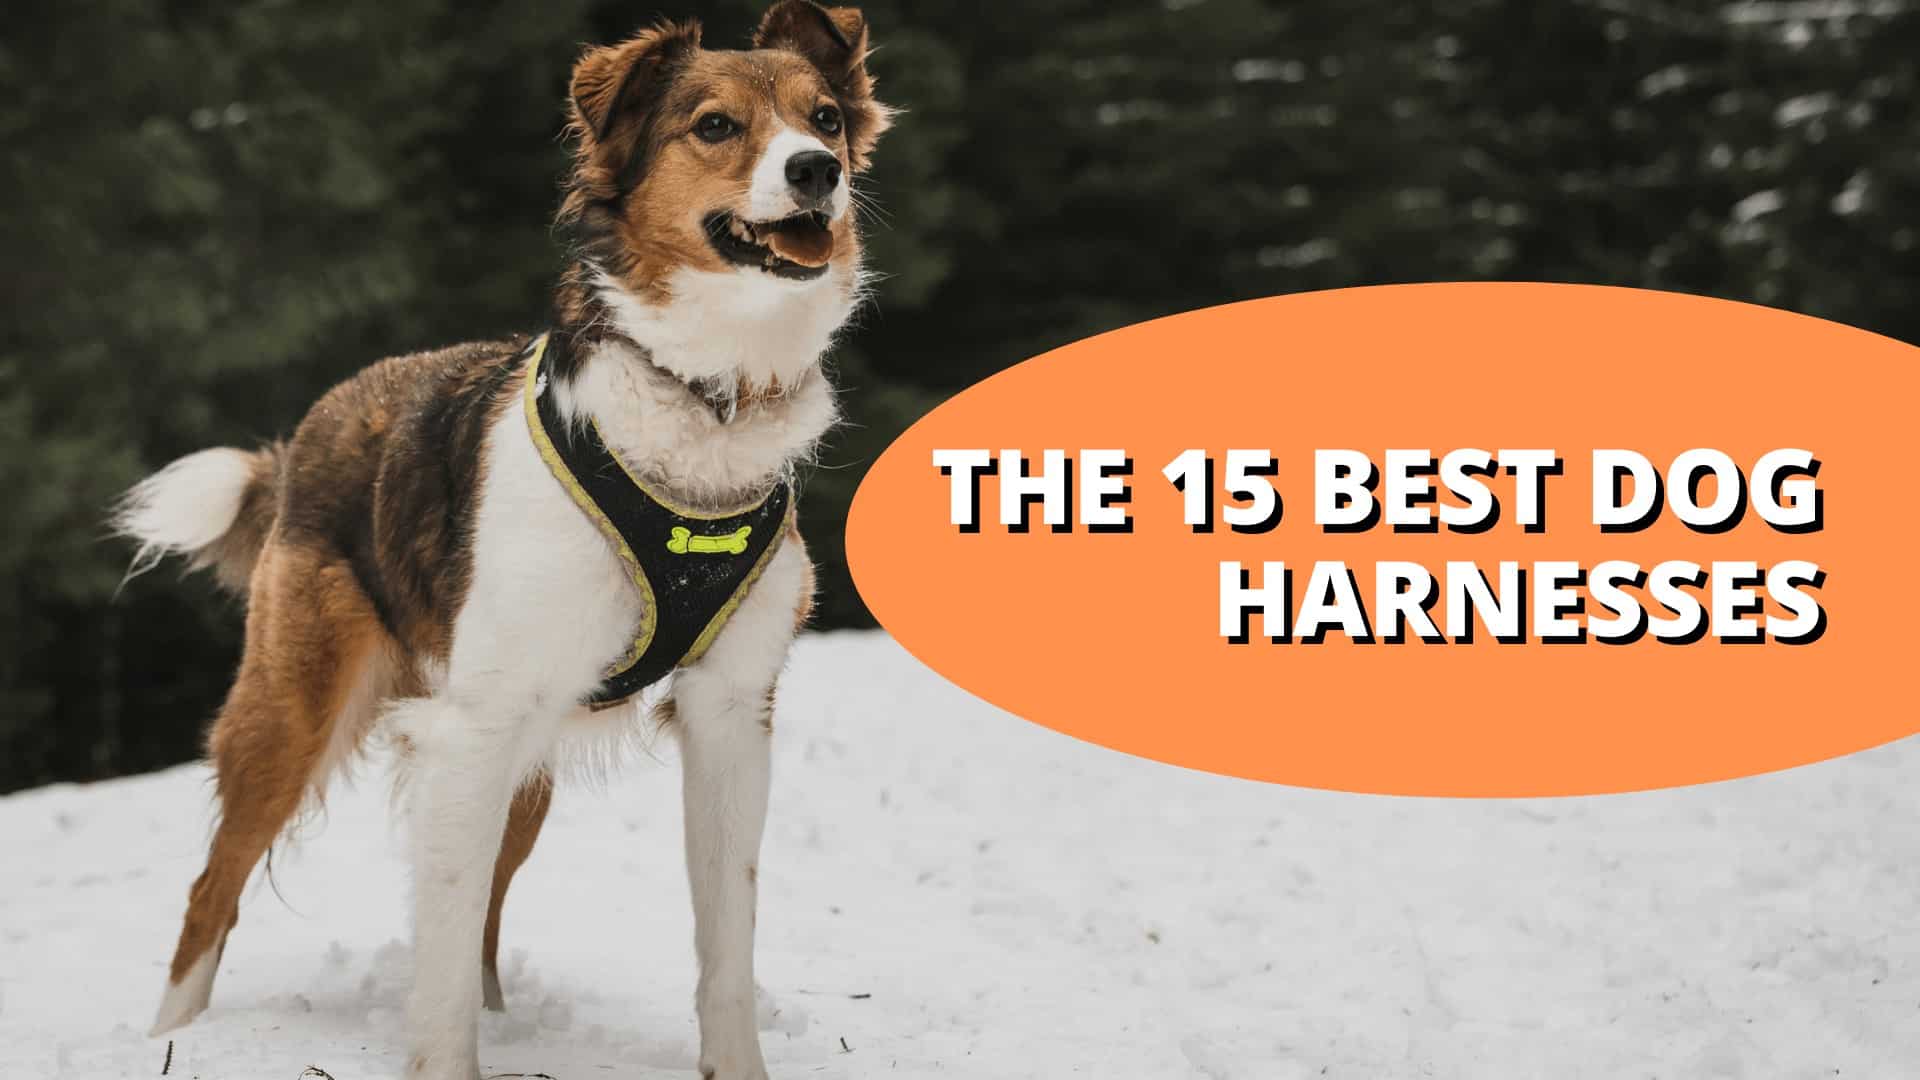 Top 15 Dog Harnesses: What Makes Them the Best of the Bunch